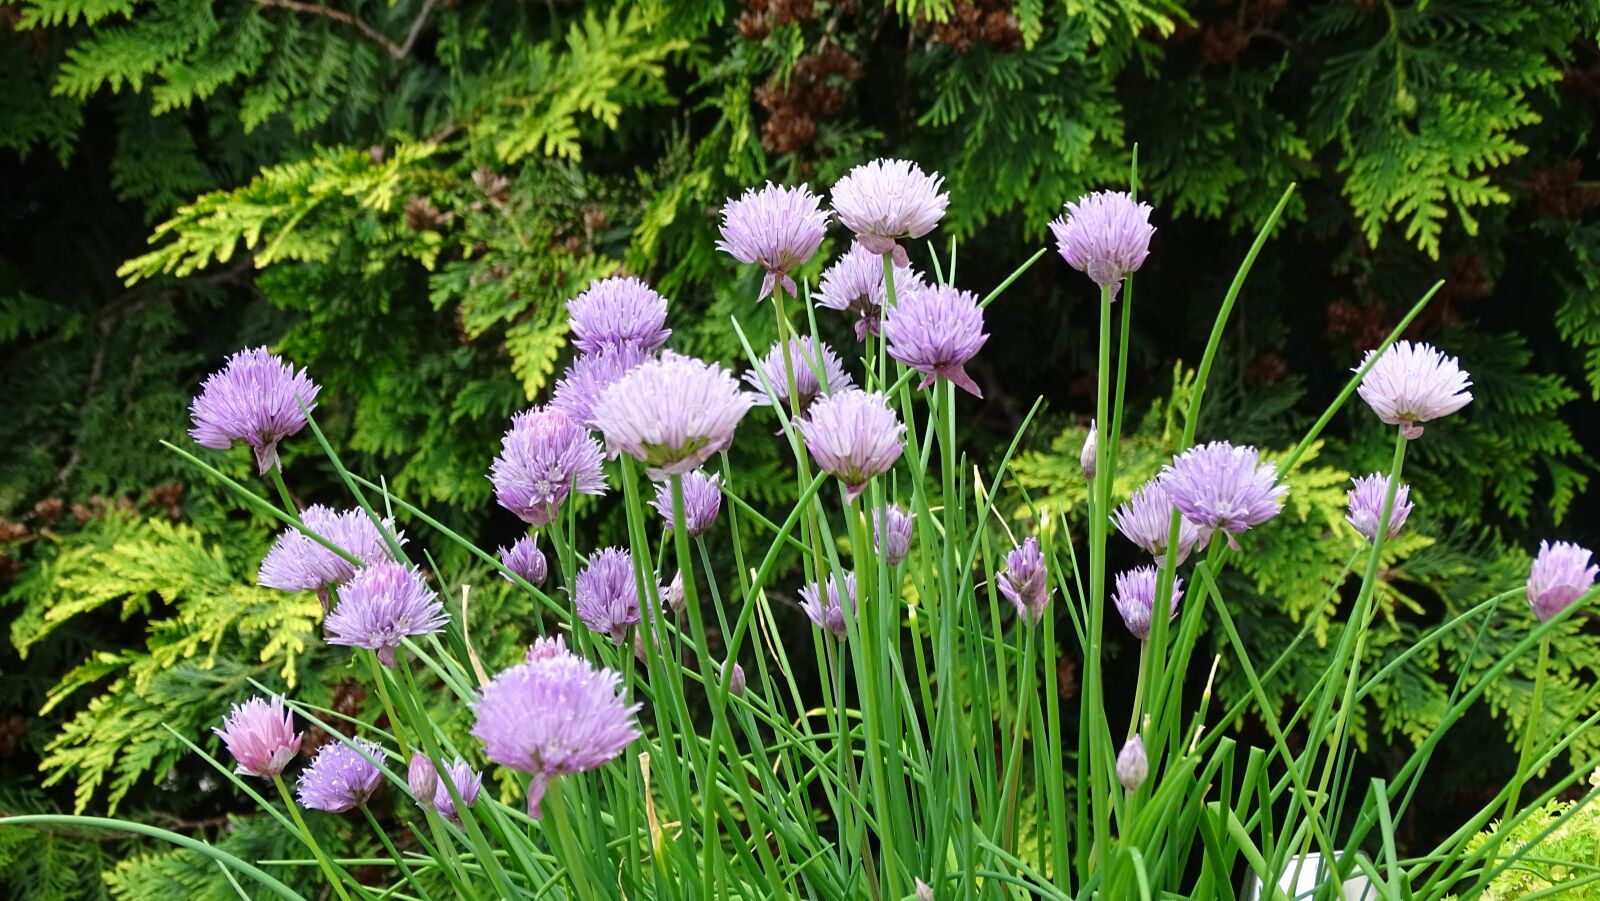 Sony Cyber-shot DSC-HX350 sample photo. Chives, herb, herbs photography